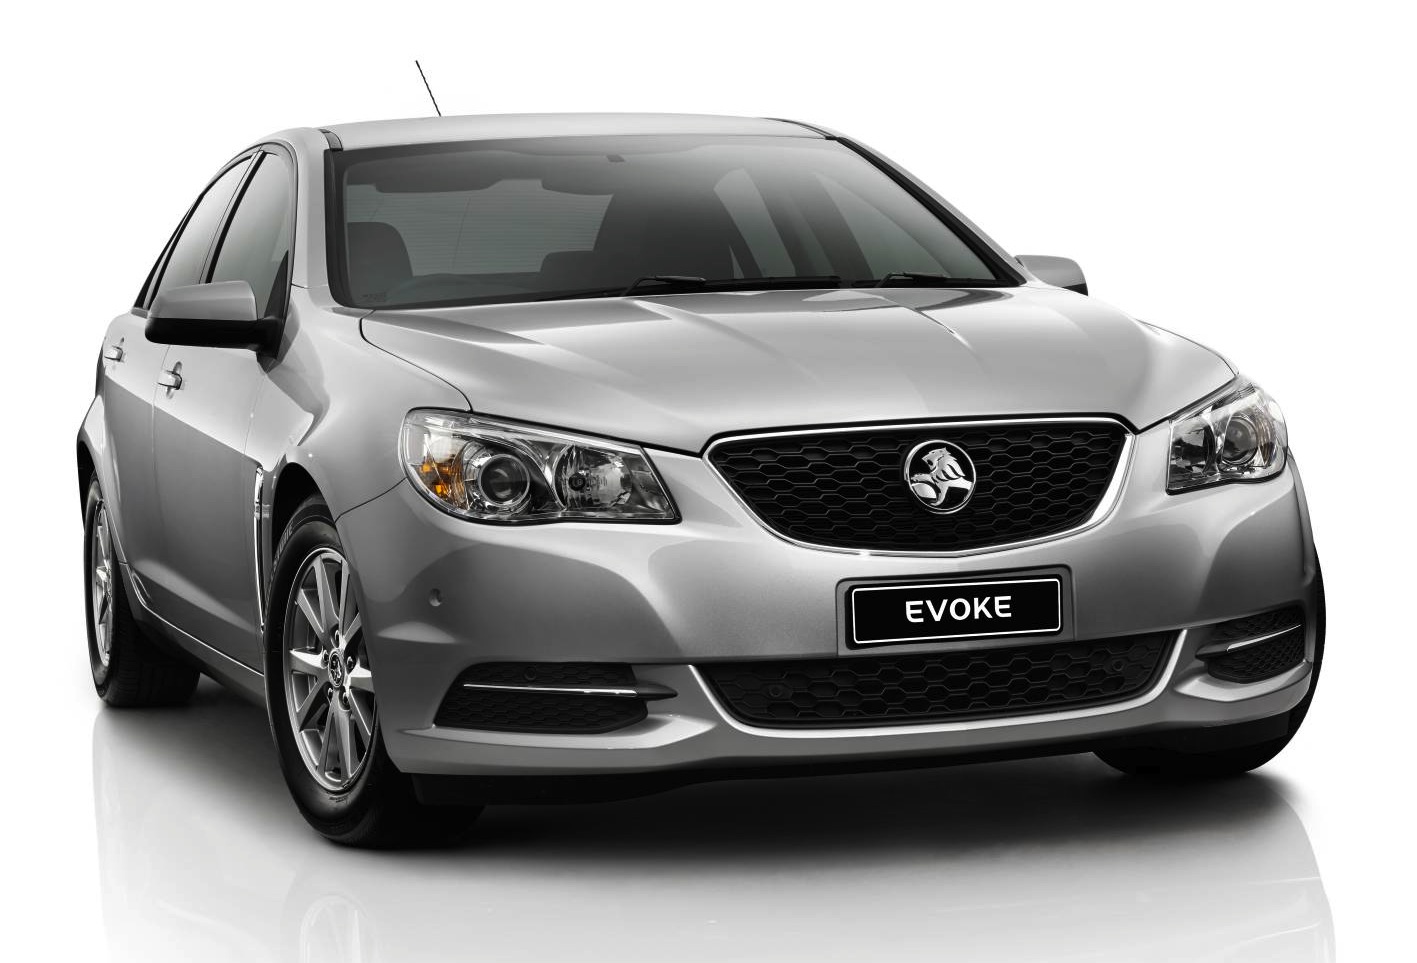 Holden VF Commodore priced from $34,990, $5k-$10k cheaper